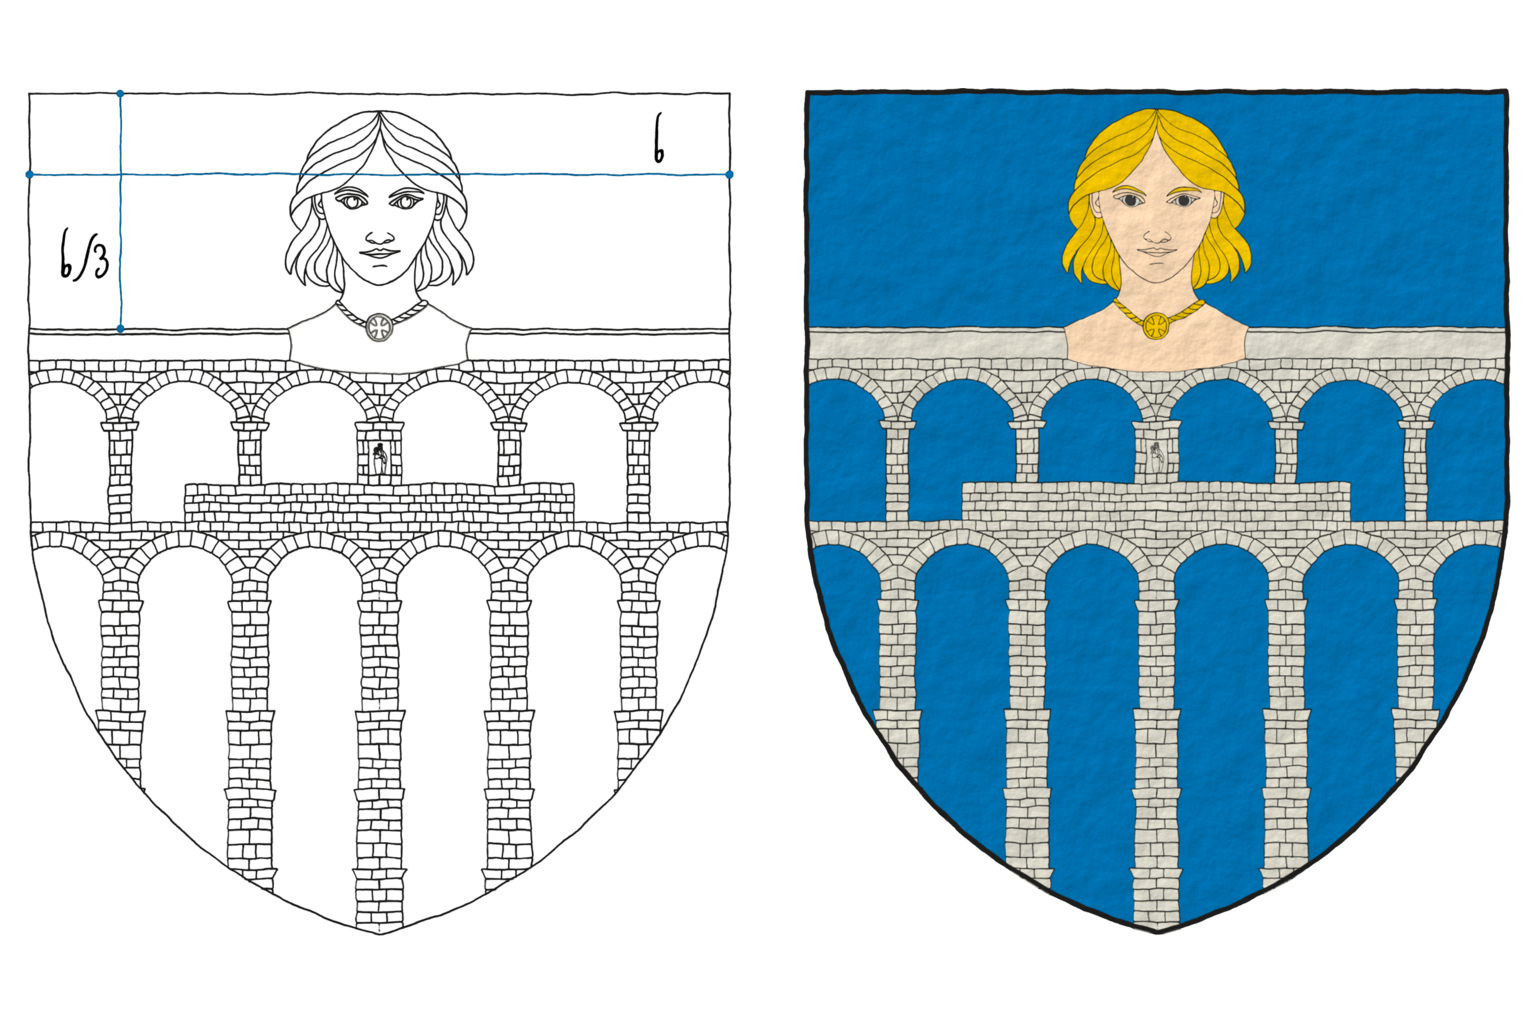 Coat of arms of the municipality of Segovia, Castile and Leon. The image shows in 2 steps how I emblazoned it. Blazon: Azure, an aqueduct Argent, masoned sable ensigned with a maiden's head proper.